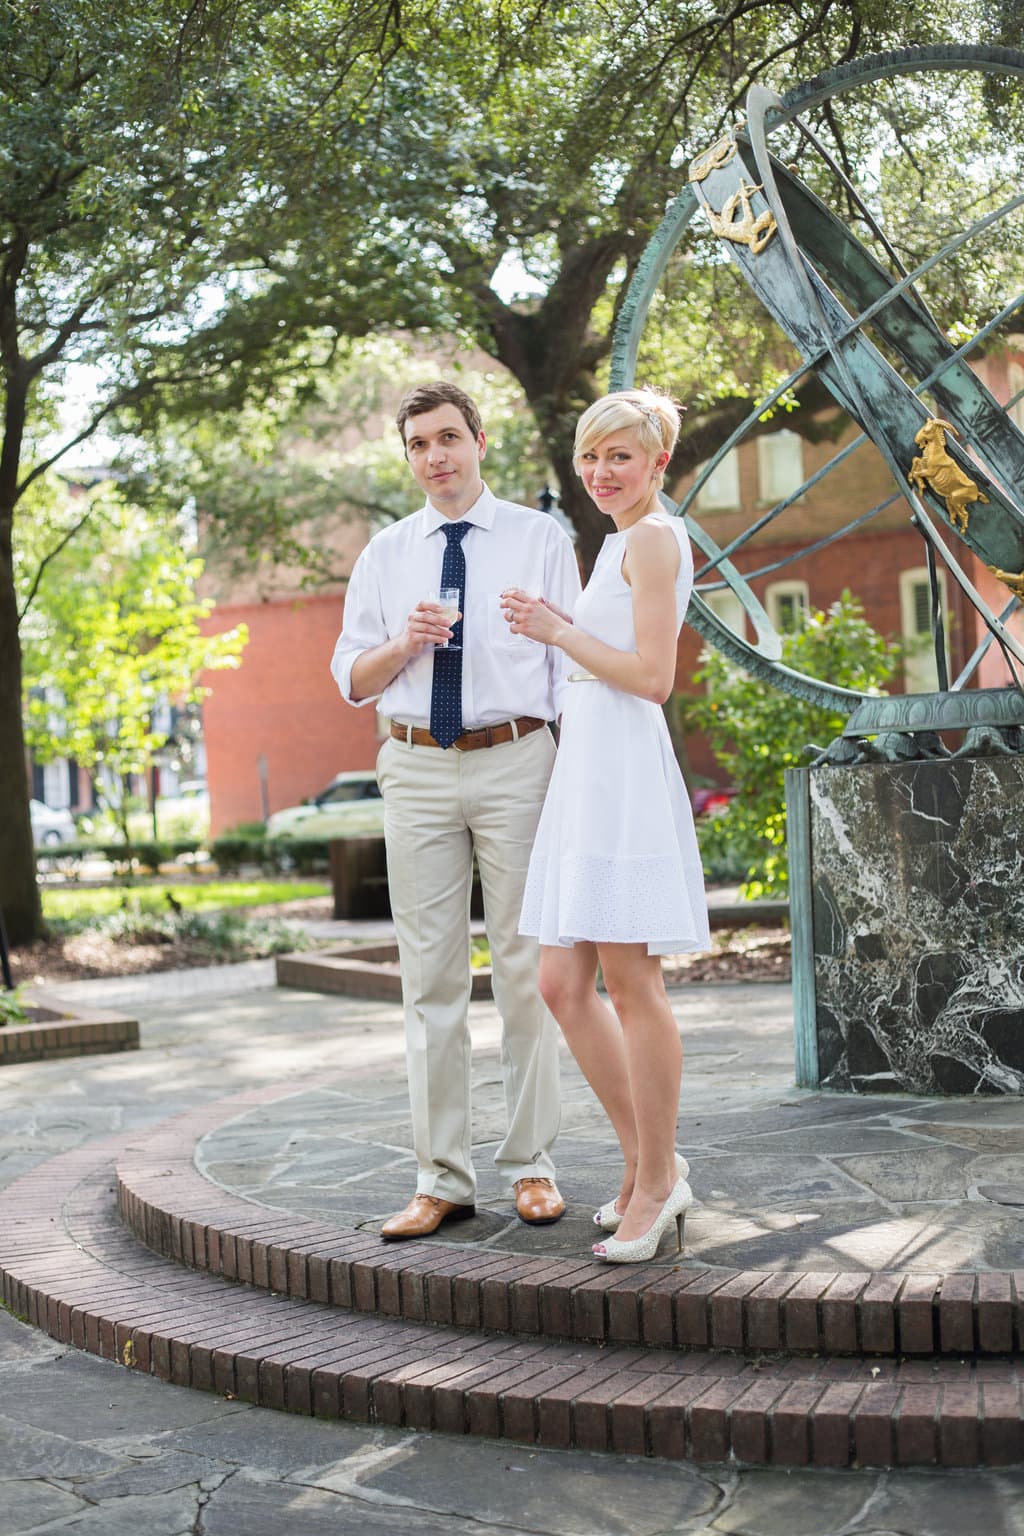 Wedding Pictures in Troup Square in Savannah, GA